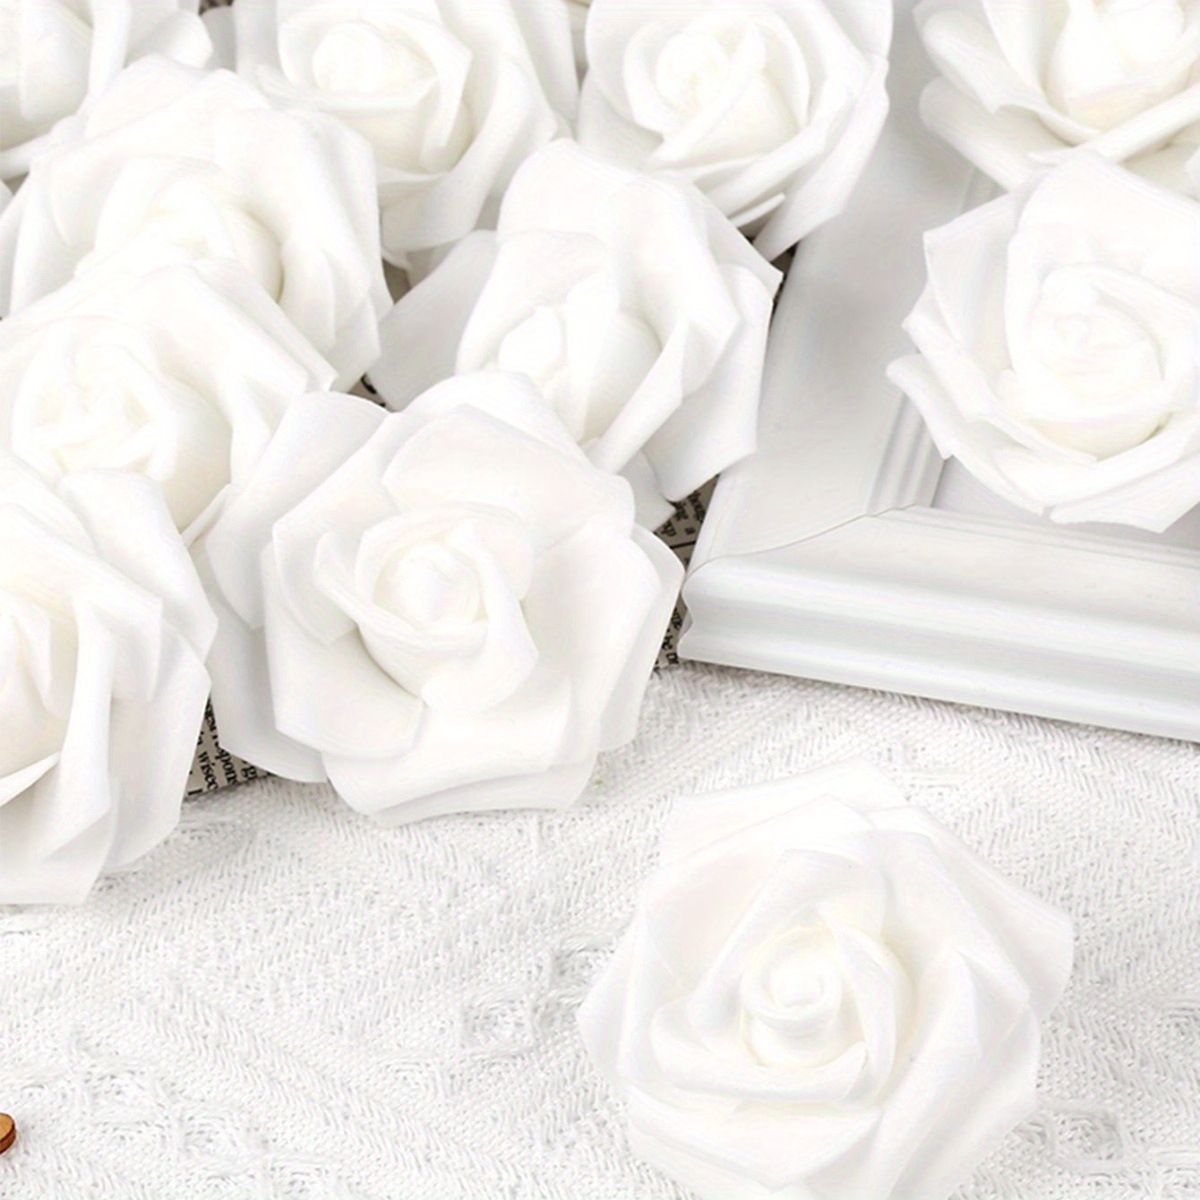 

100 Pcs Artificial Rose Flower Heads, Real Looking Foam Fake Roses For Diy Wedding Baby Shower Centerpieces Arrangements Party Tables Home Decorations